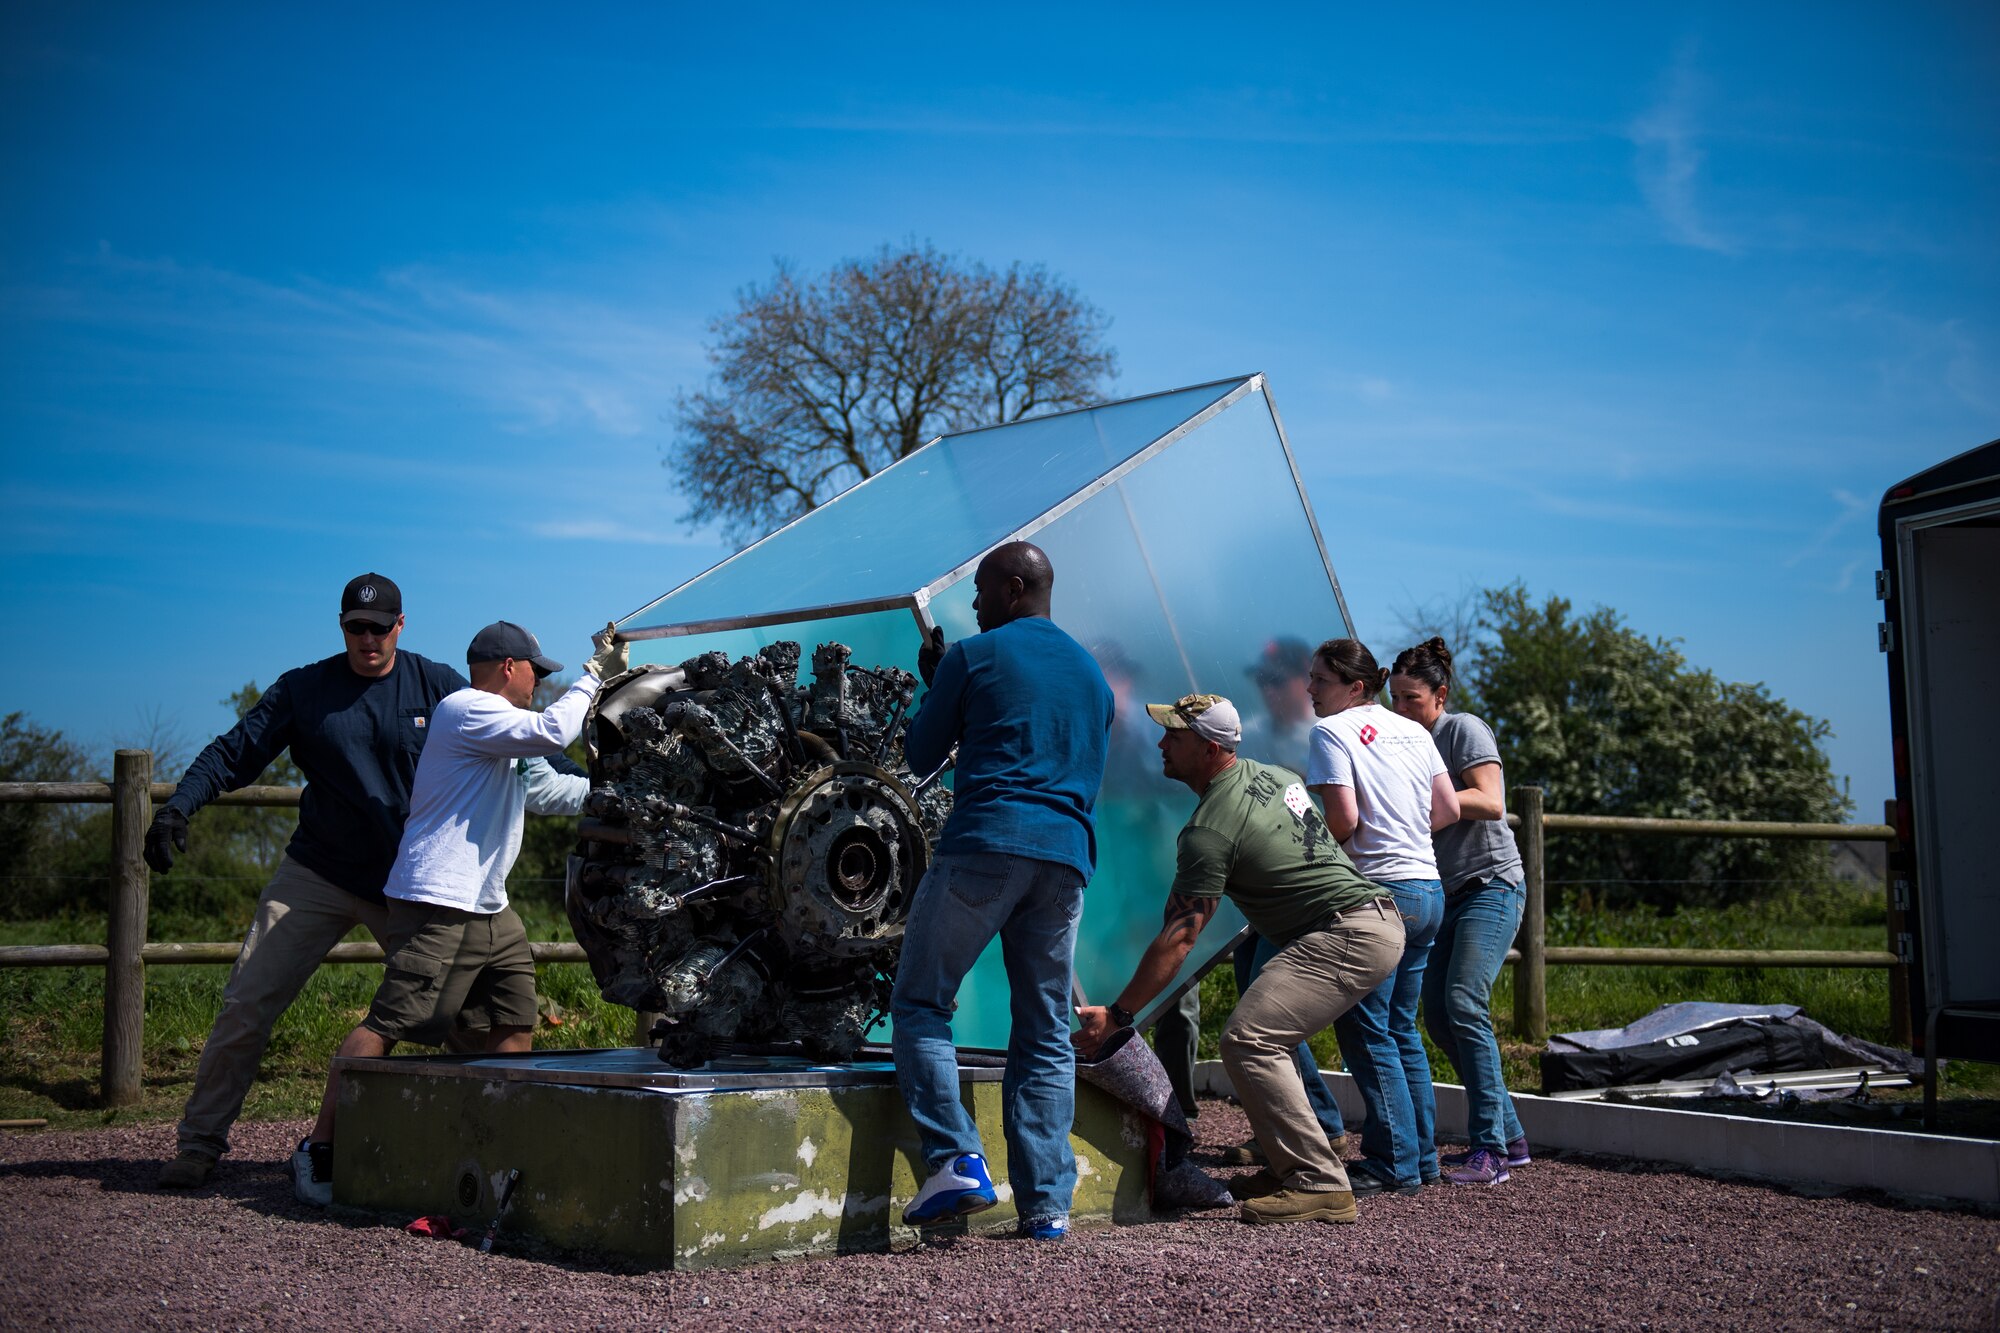 U.S. Air Force Airmen assigned to the 435th Construction Training Squadron and 435th Contingency Response Support Squadron lift a new display case over a WWII aircraft engine at a memorial in Picauville, France, April 30, 2019. The 435th CTS team built the new case from scratch, transported it from Ramstein Air Base, Germany, and mounted it to the pedestal of the display. (U.S. Air Force photo by Staff Sgt. Devin Boyer)